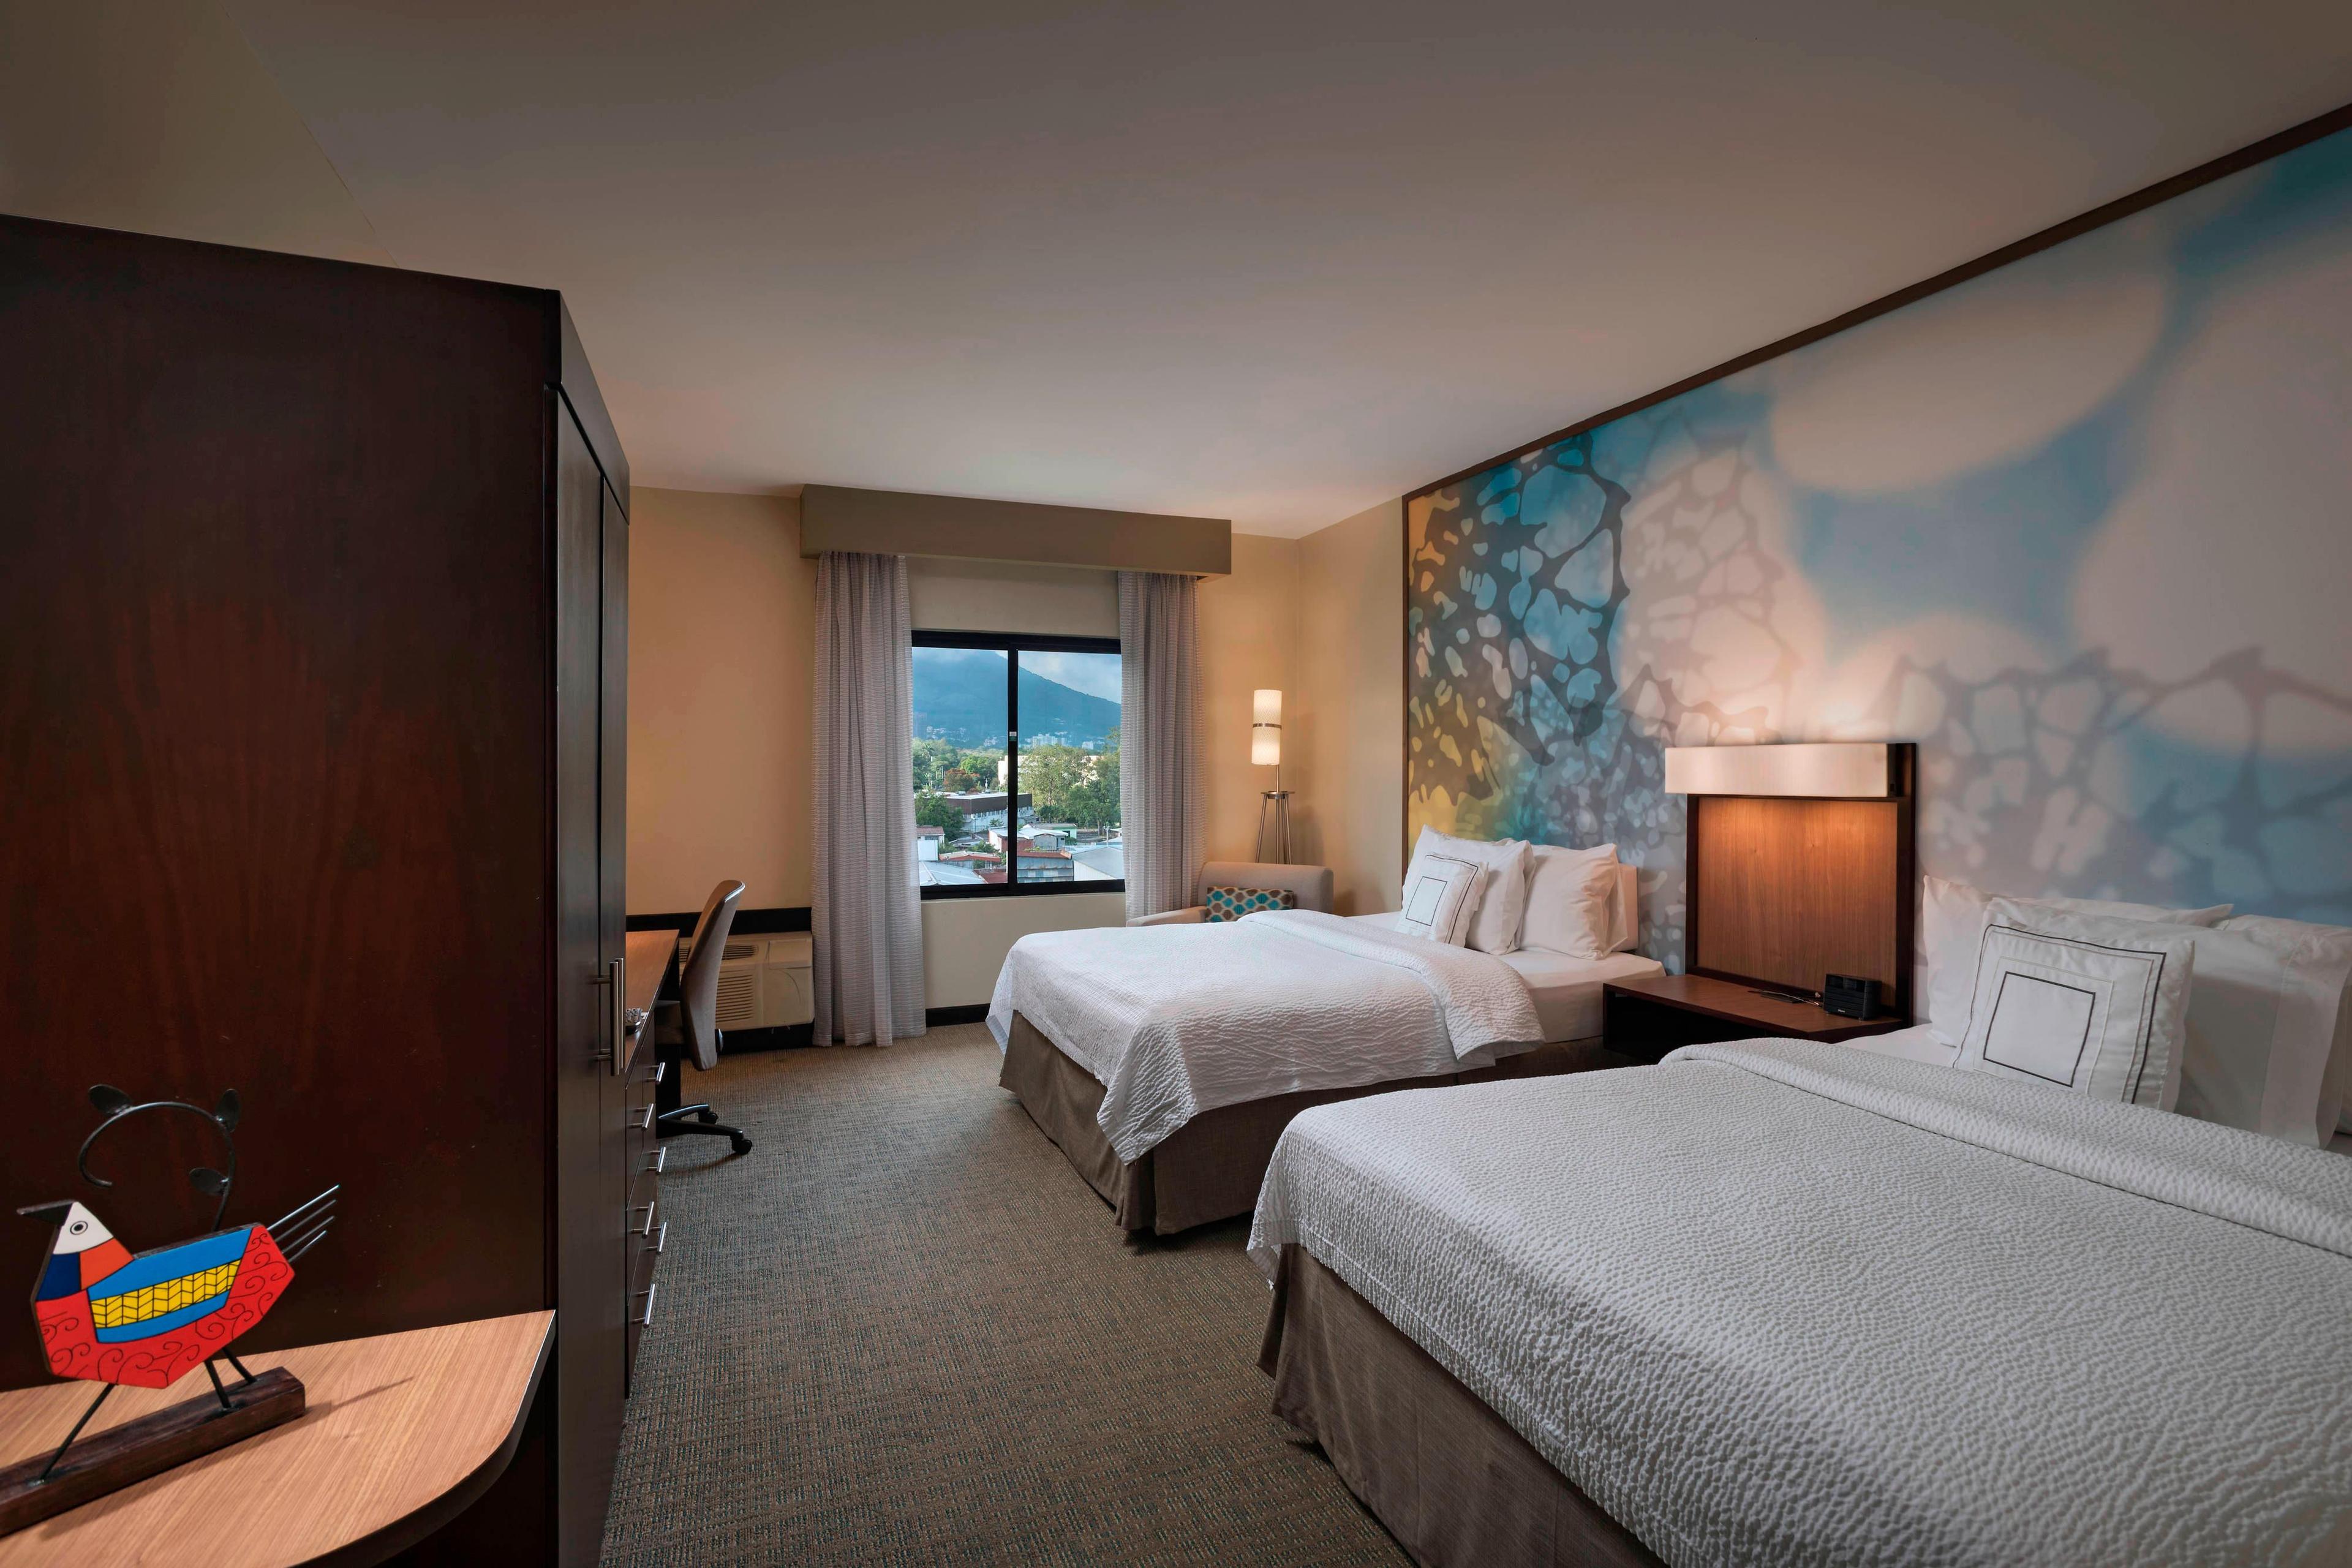 Our soothing rooms feature comfortable beds surrounded by a fresh, progressive design that provides plenty of outlets and comfortable spaces for both business and pleasure.